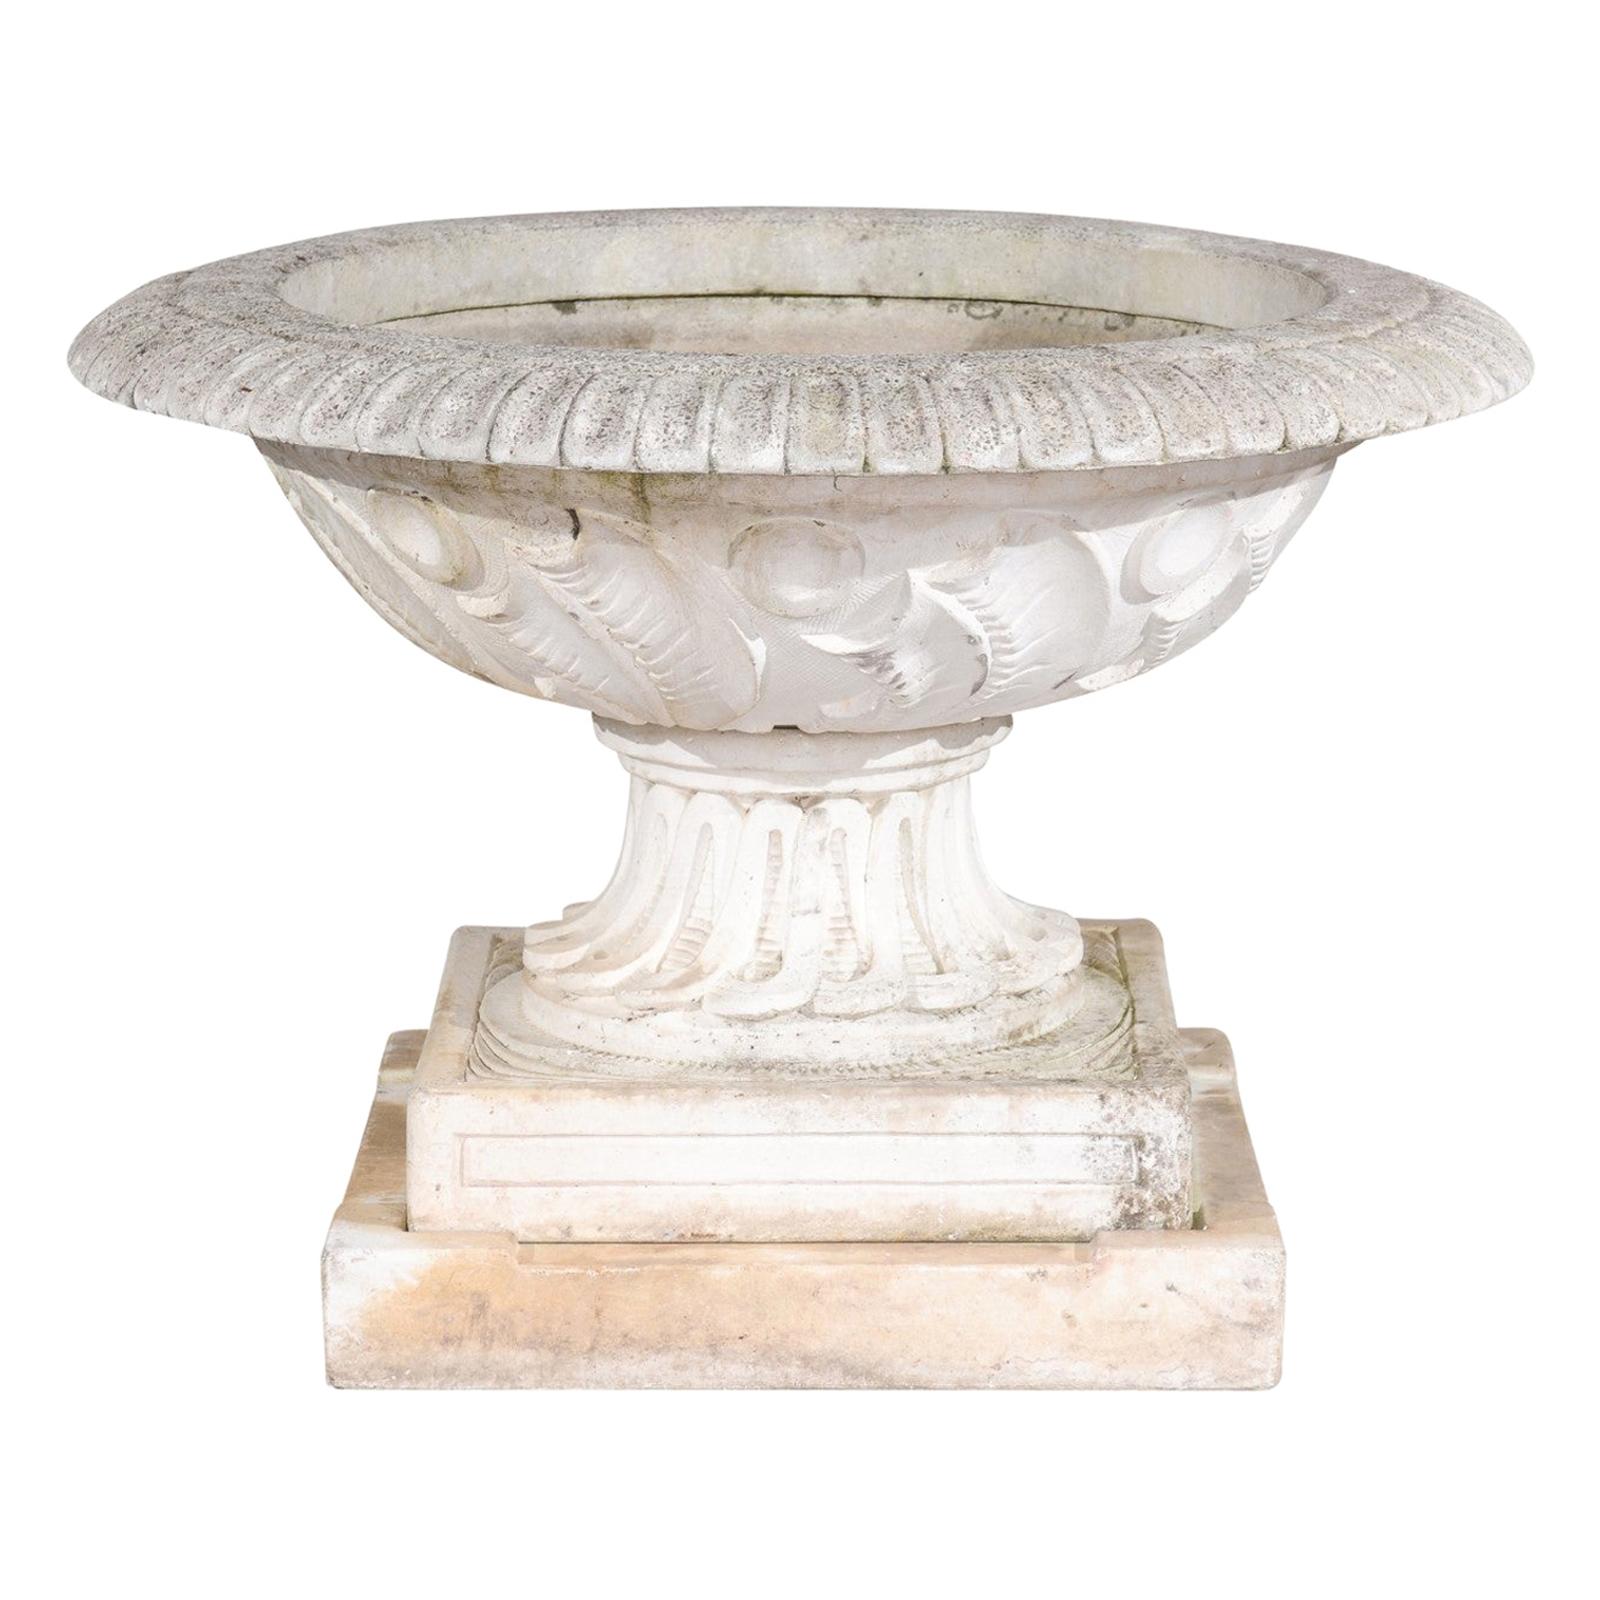 English Vintage 20th Century Cast Stone Fountain with Scoop and Foliage Motifs For Sale